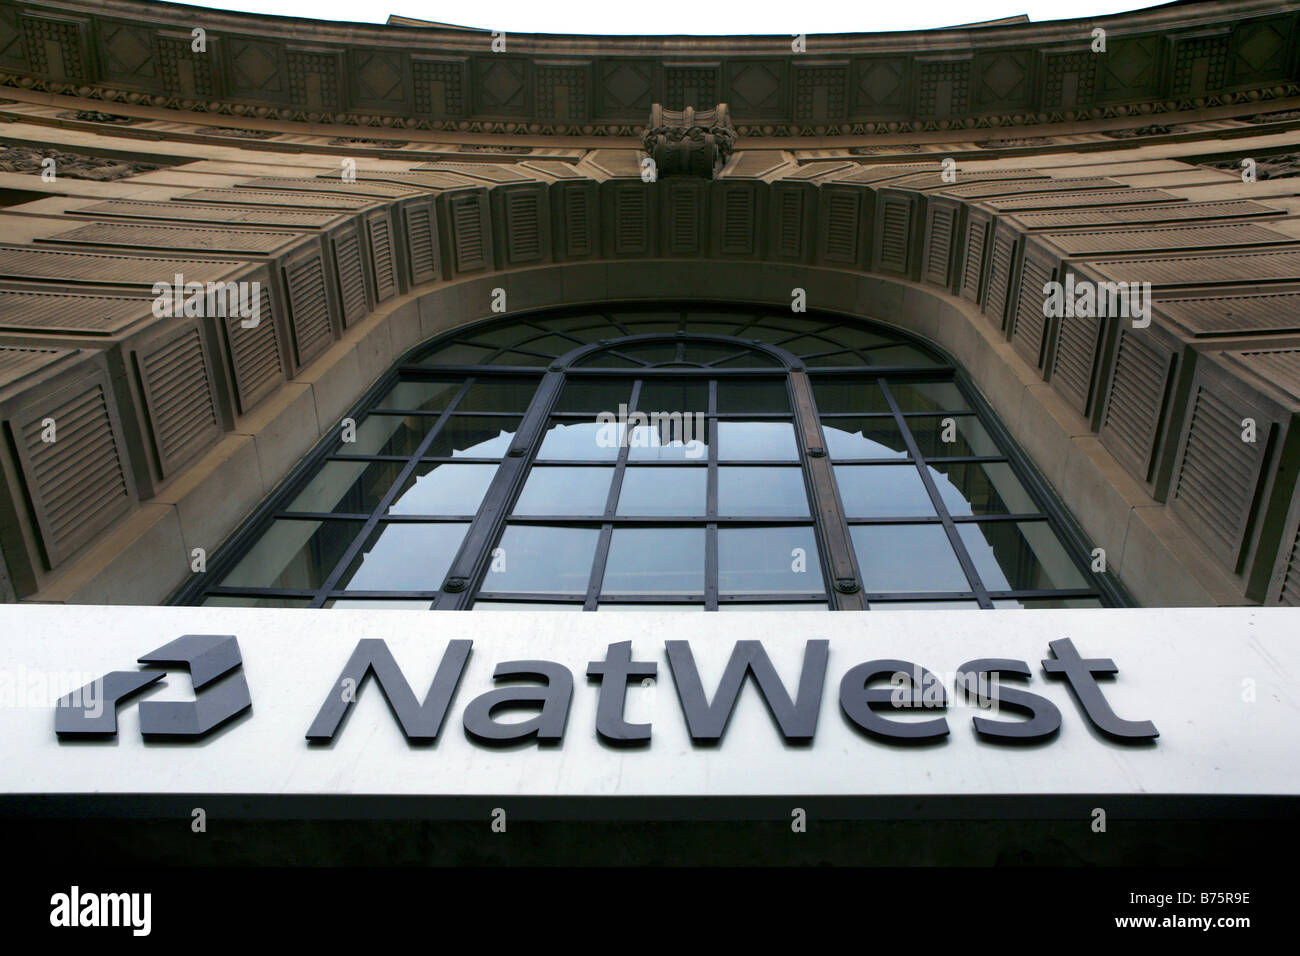 Natwest Bank sign and logo outside a brand in Piccadilly London UK. Stock Photo